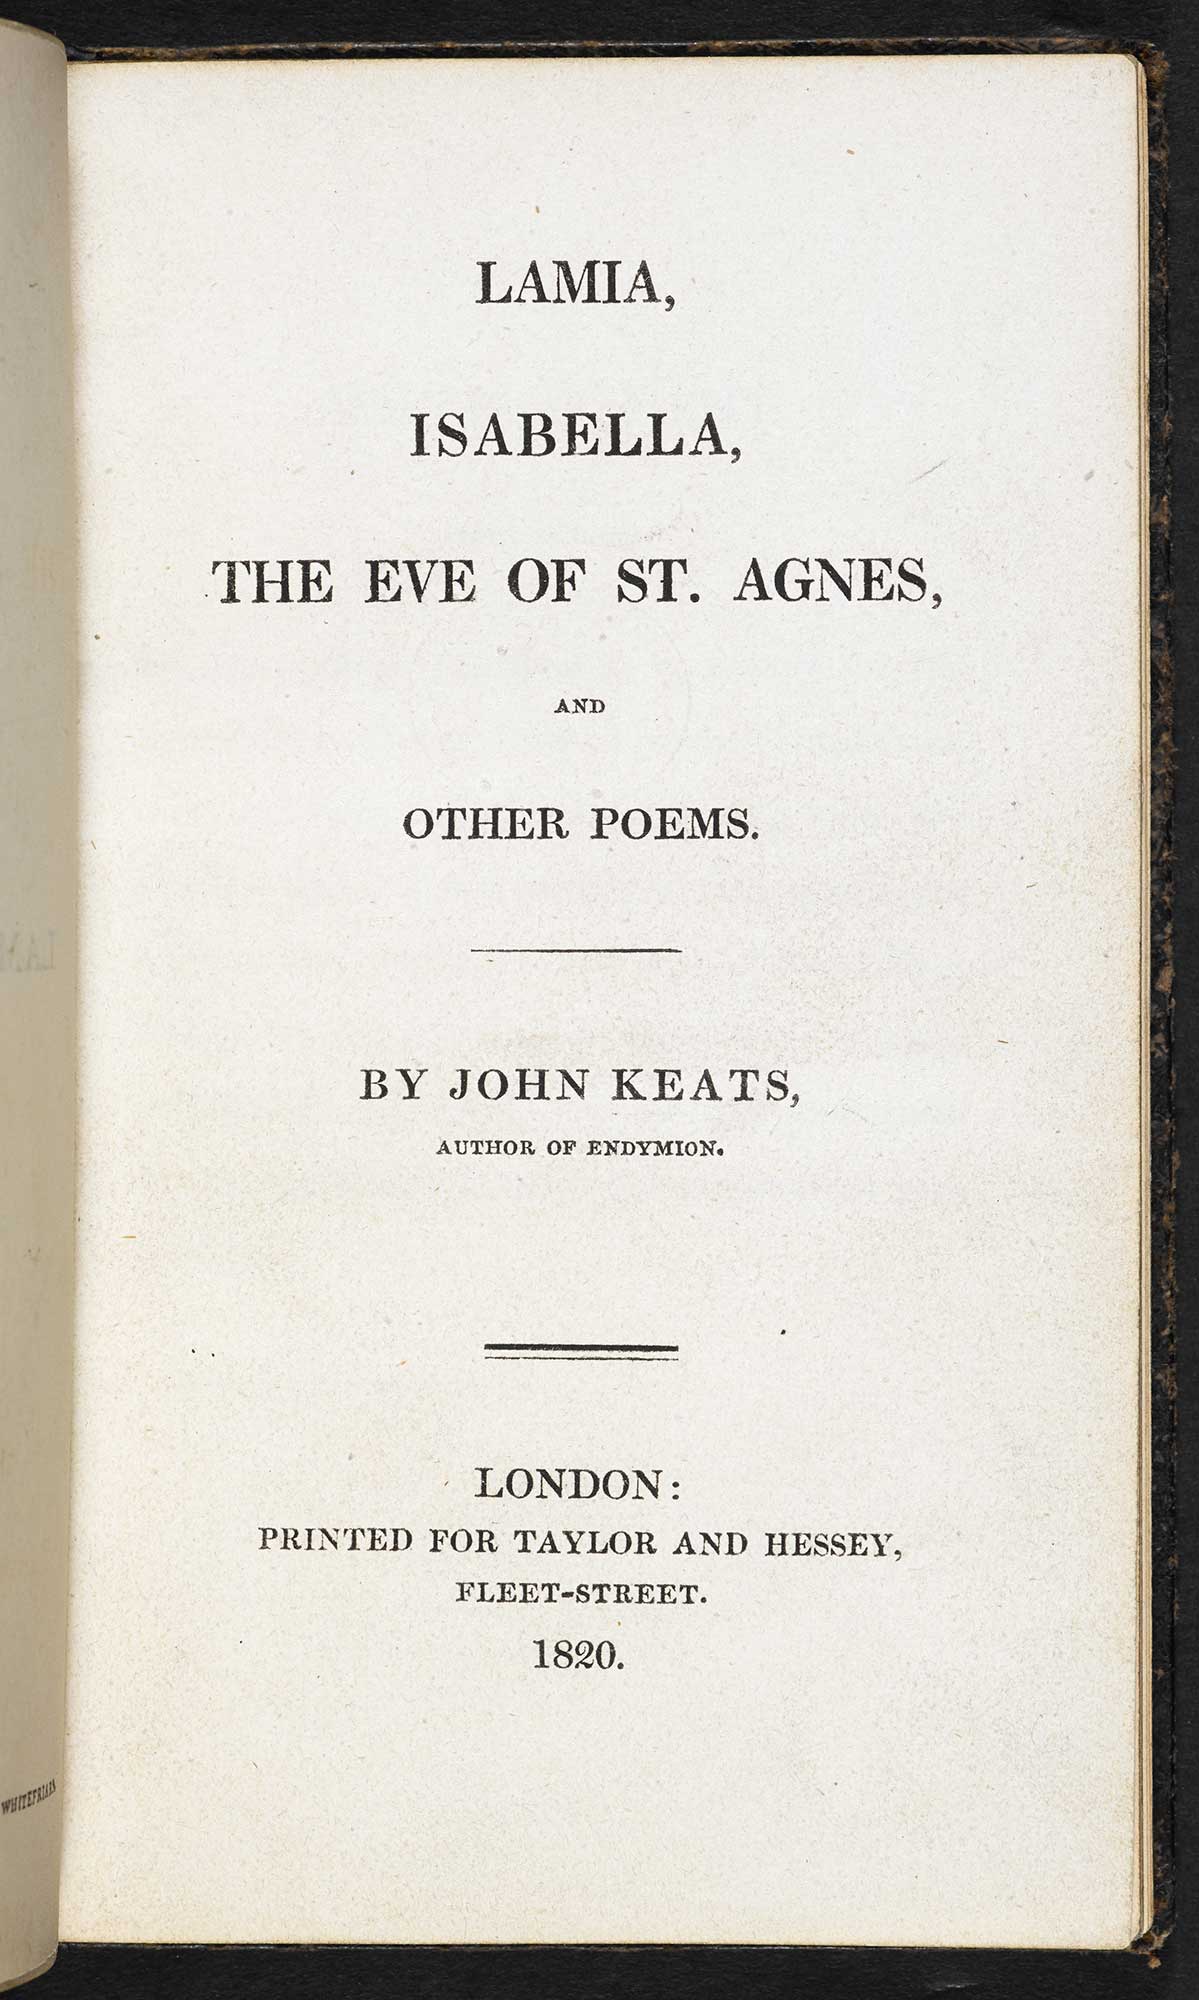 Title page for Keats’s 1820 collection. Click to enlarge.